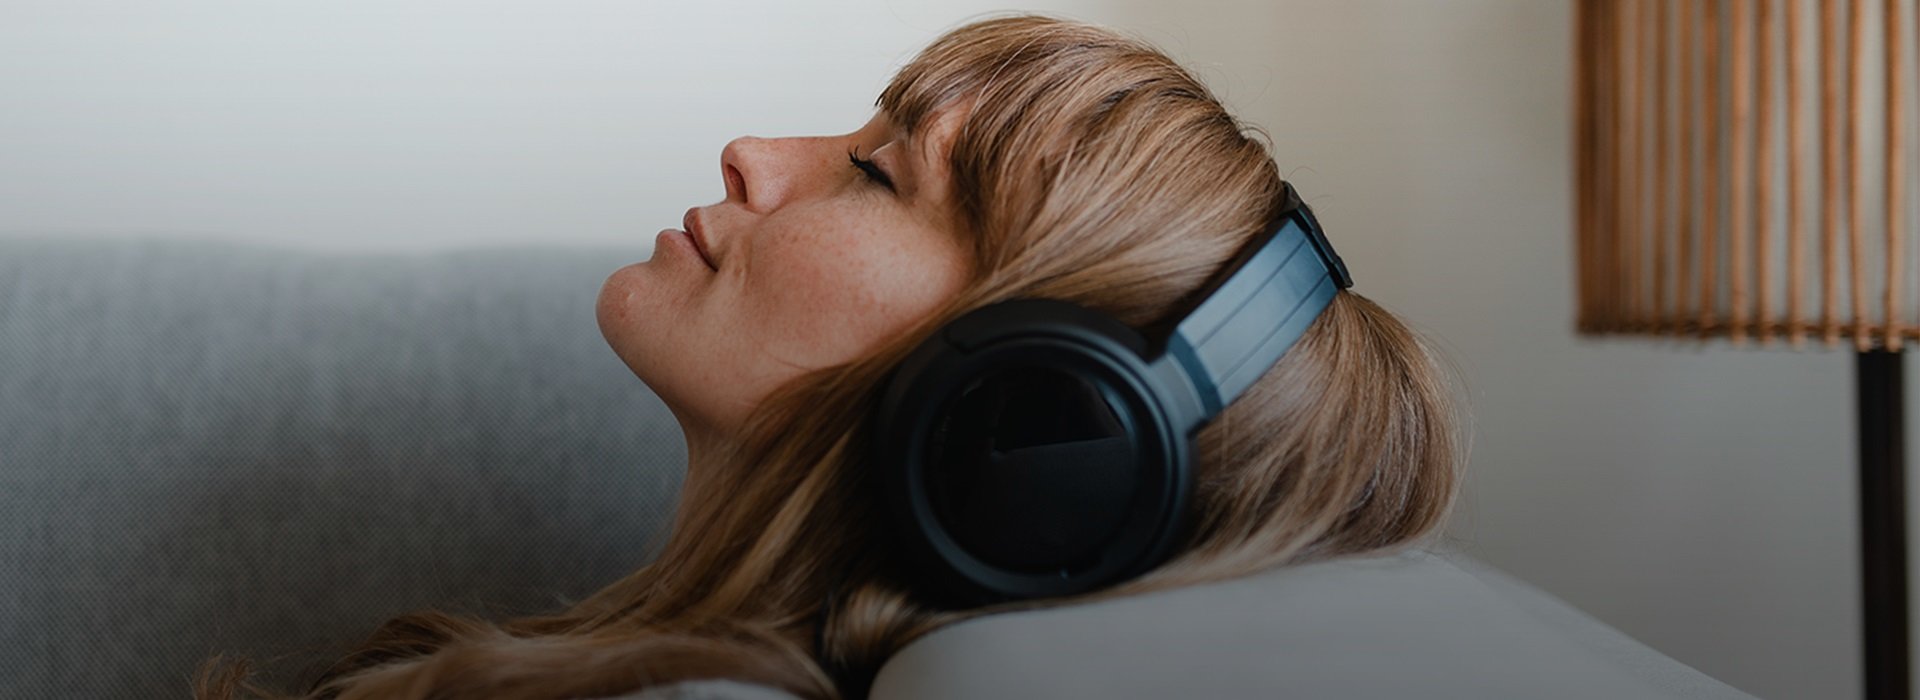 A woman is lying on the couch and listening to music on headphones